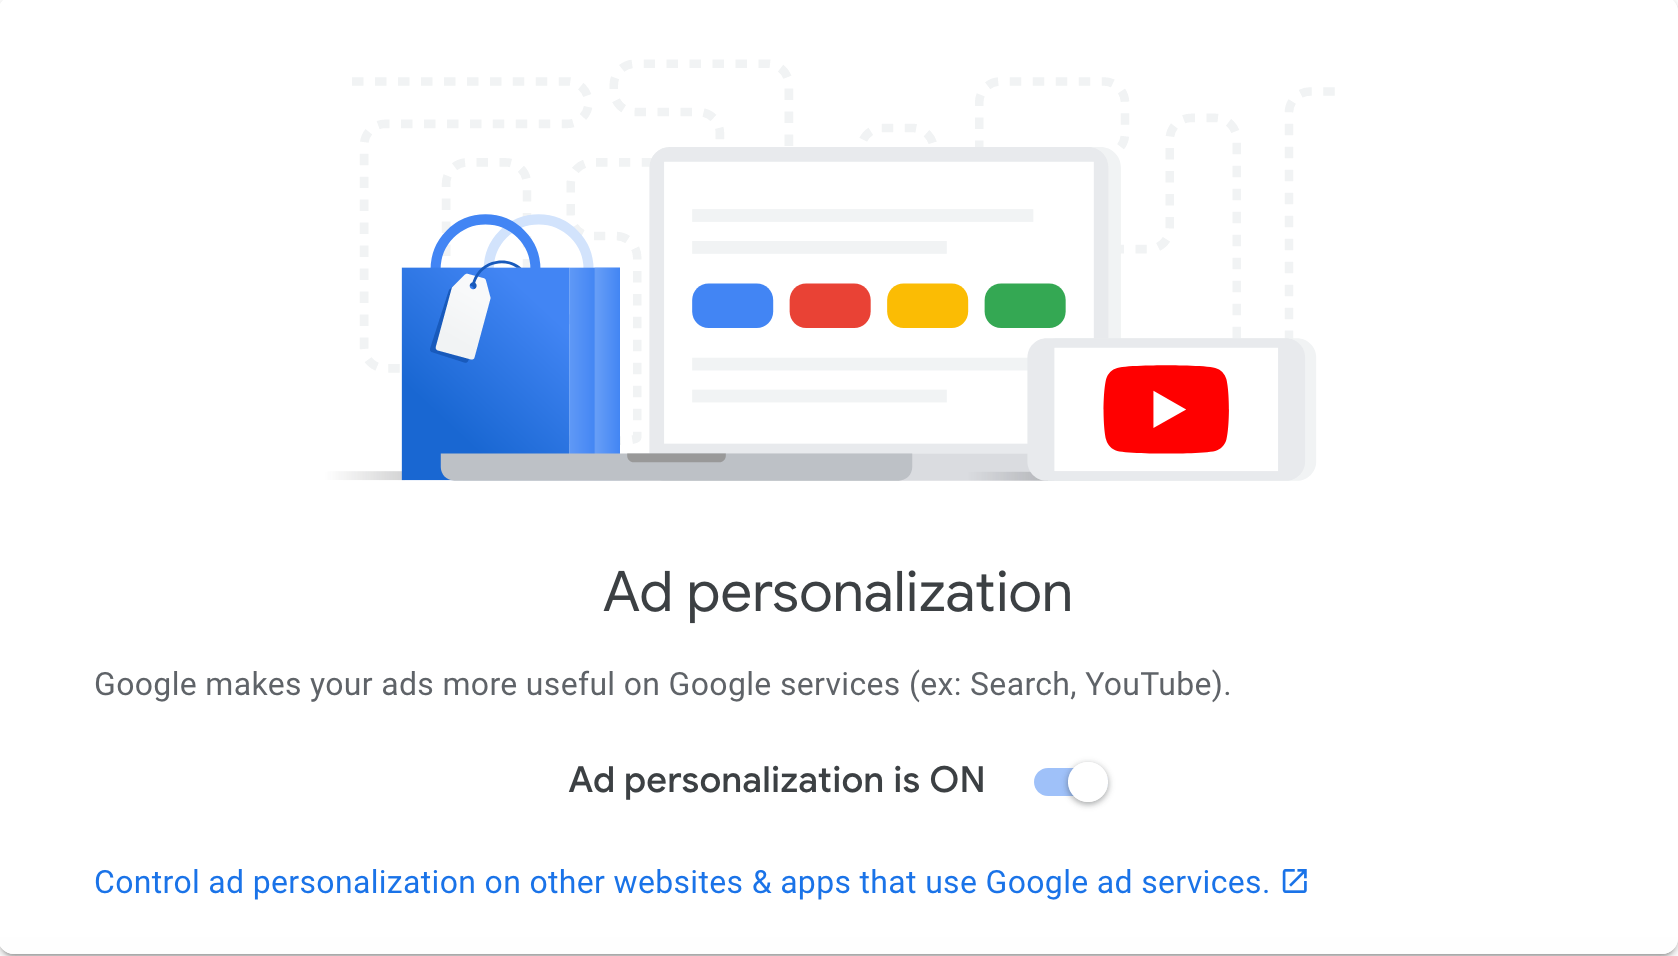 Google Helpfully Reminds Us How To Turn Off Invasive Personalised Ads